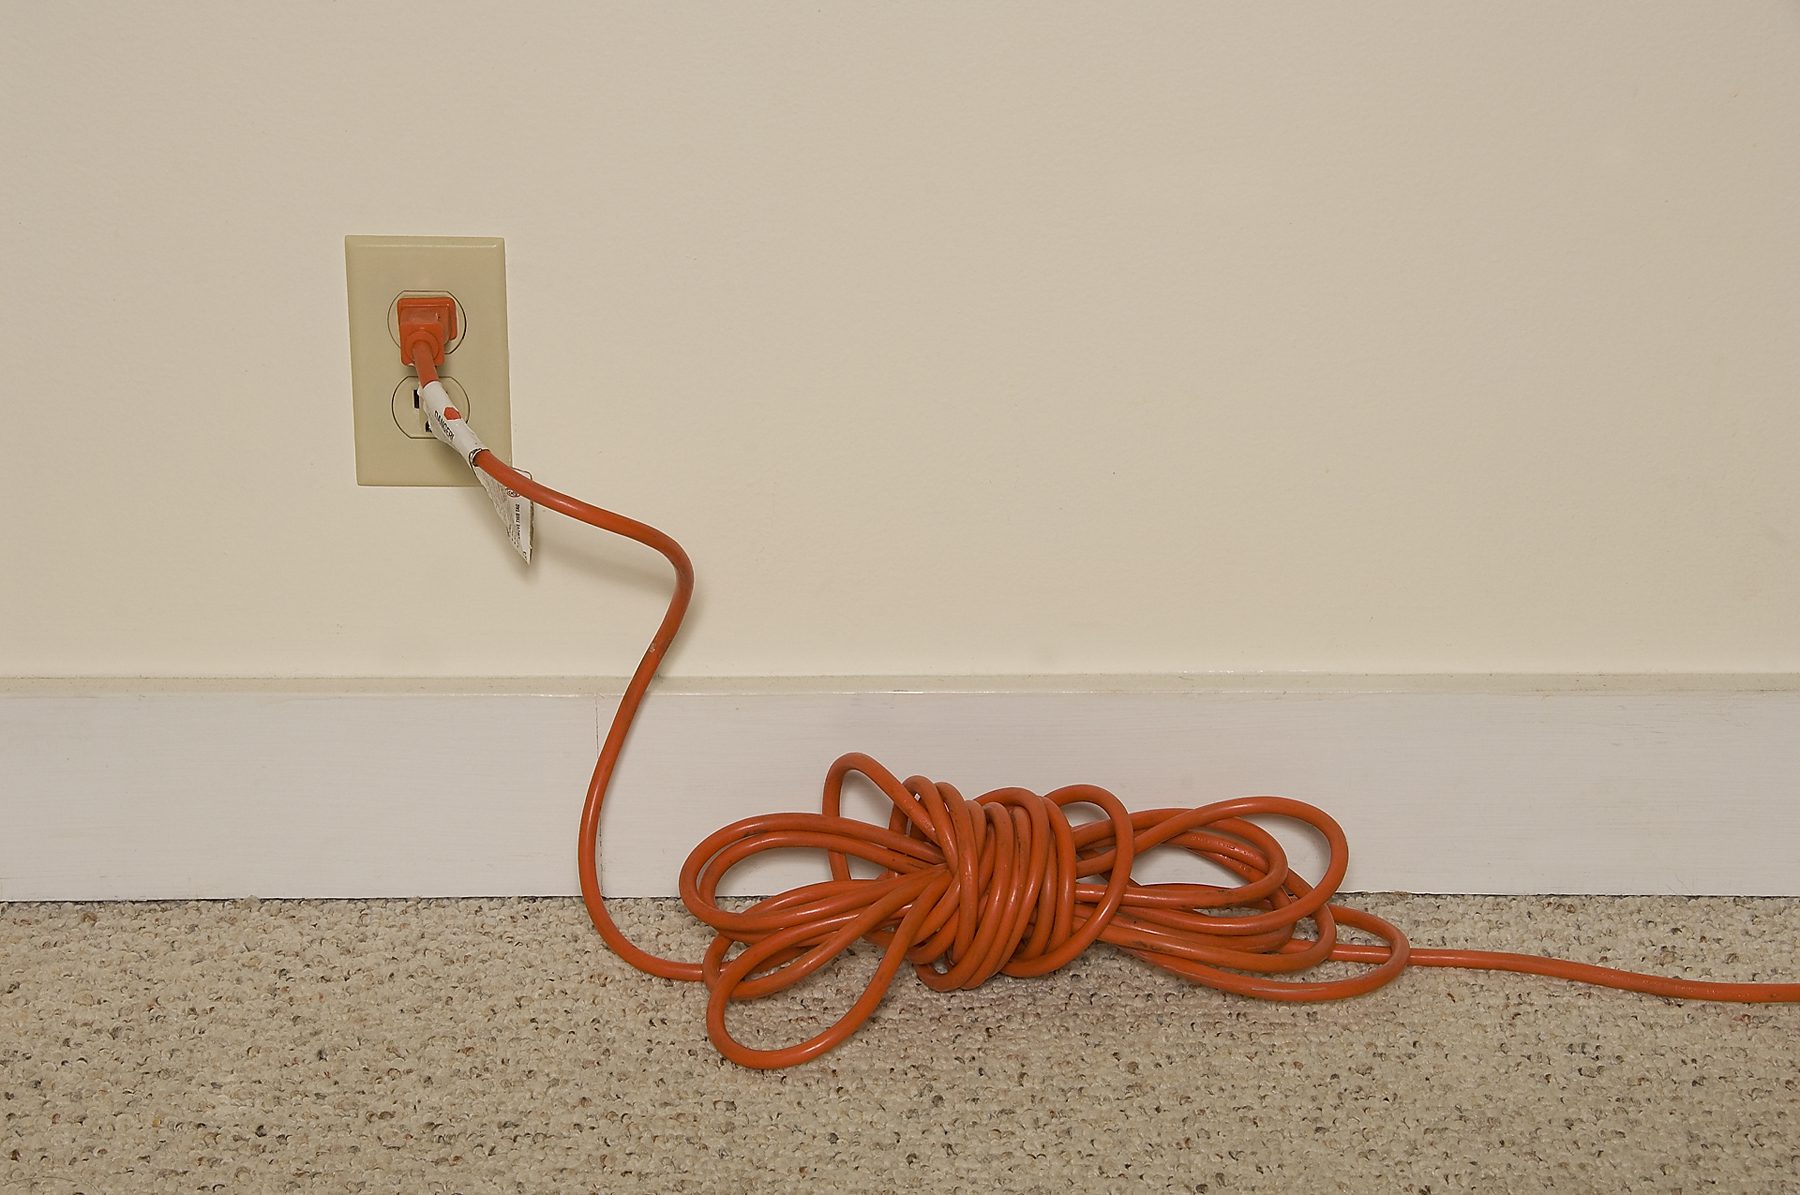 Image of an electrical cord